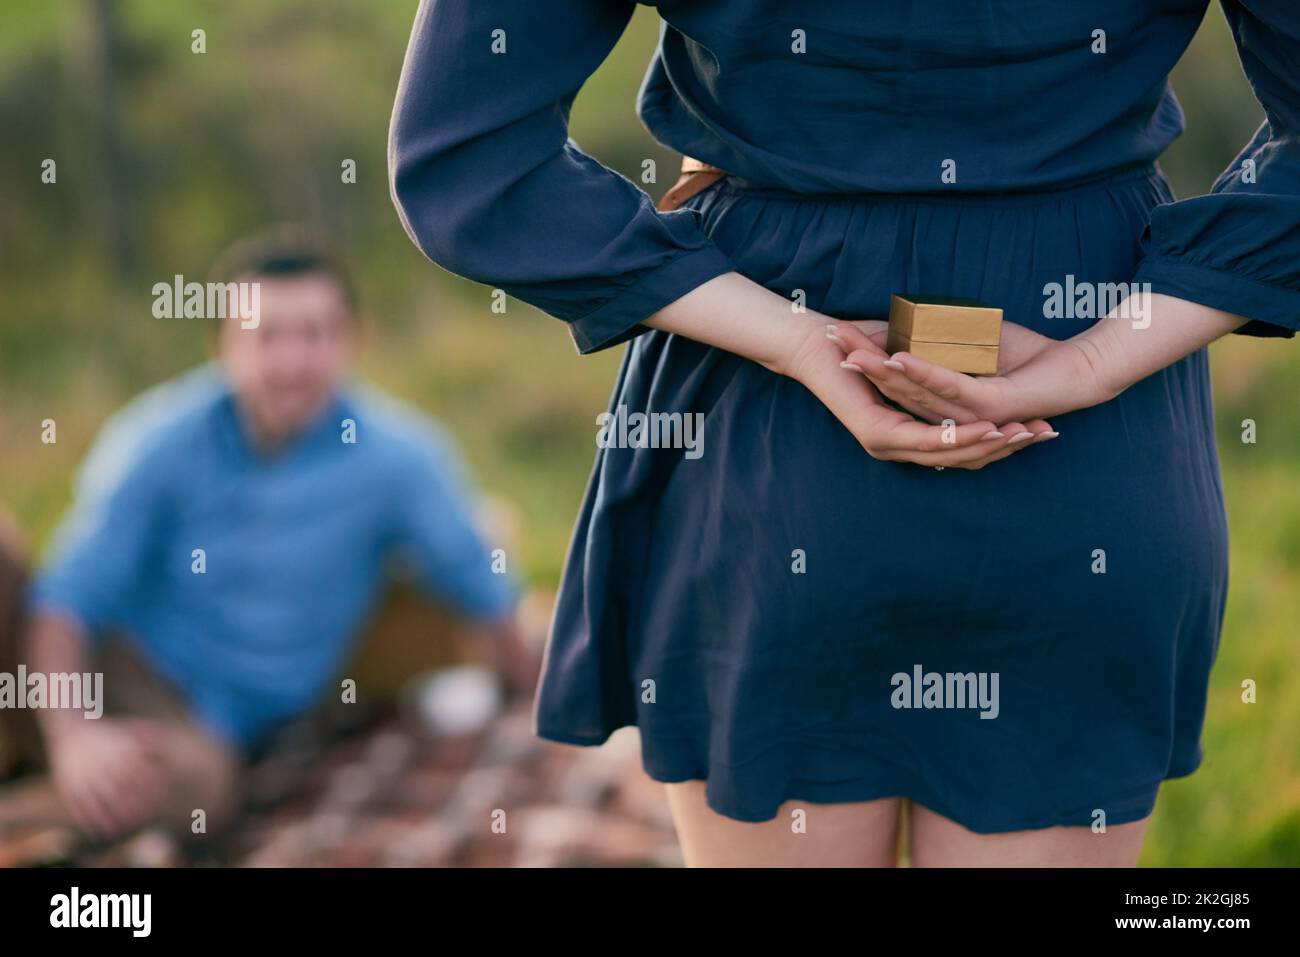 Shes plucked up the courage to pop the question instead. Rear view shot of a woman about to propose to her boyfriend with an engagement ring in a box. Stock Photo